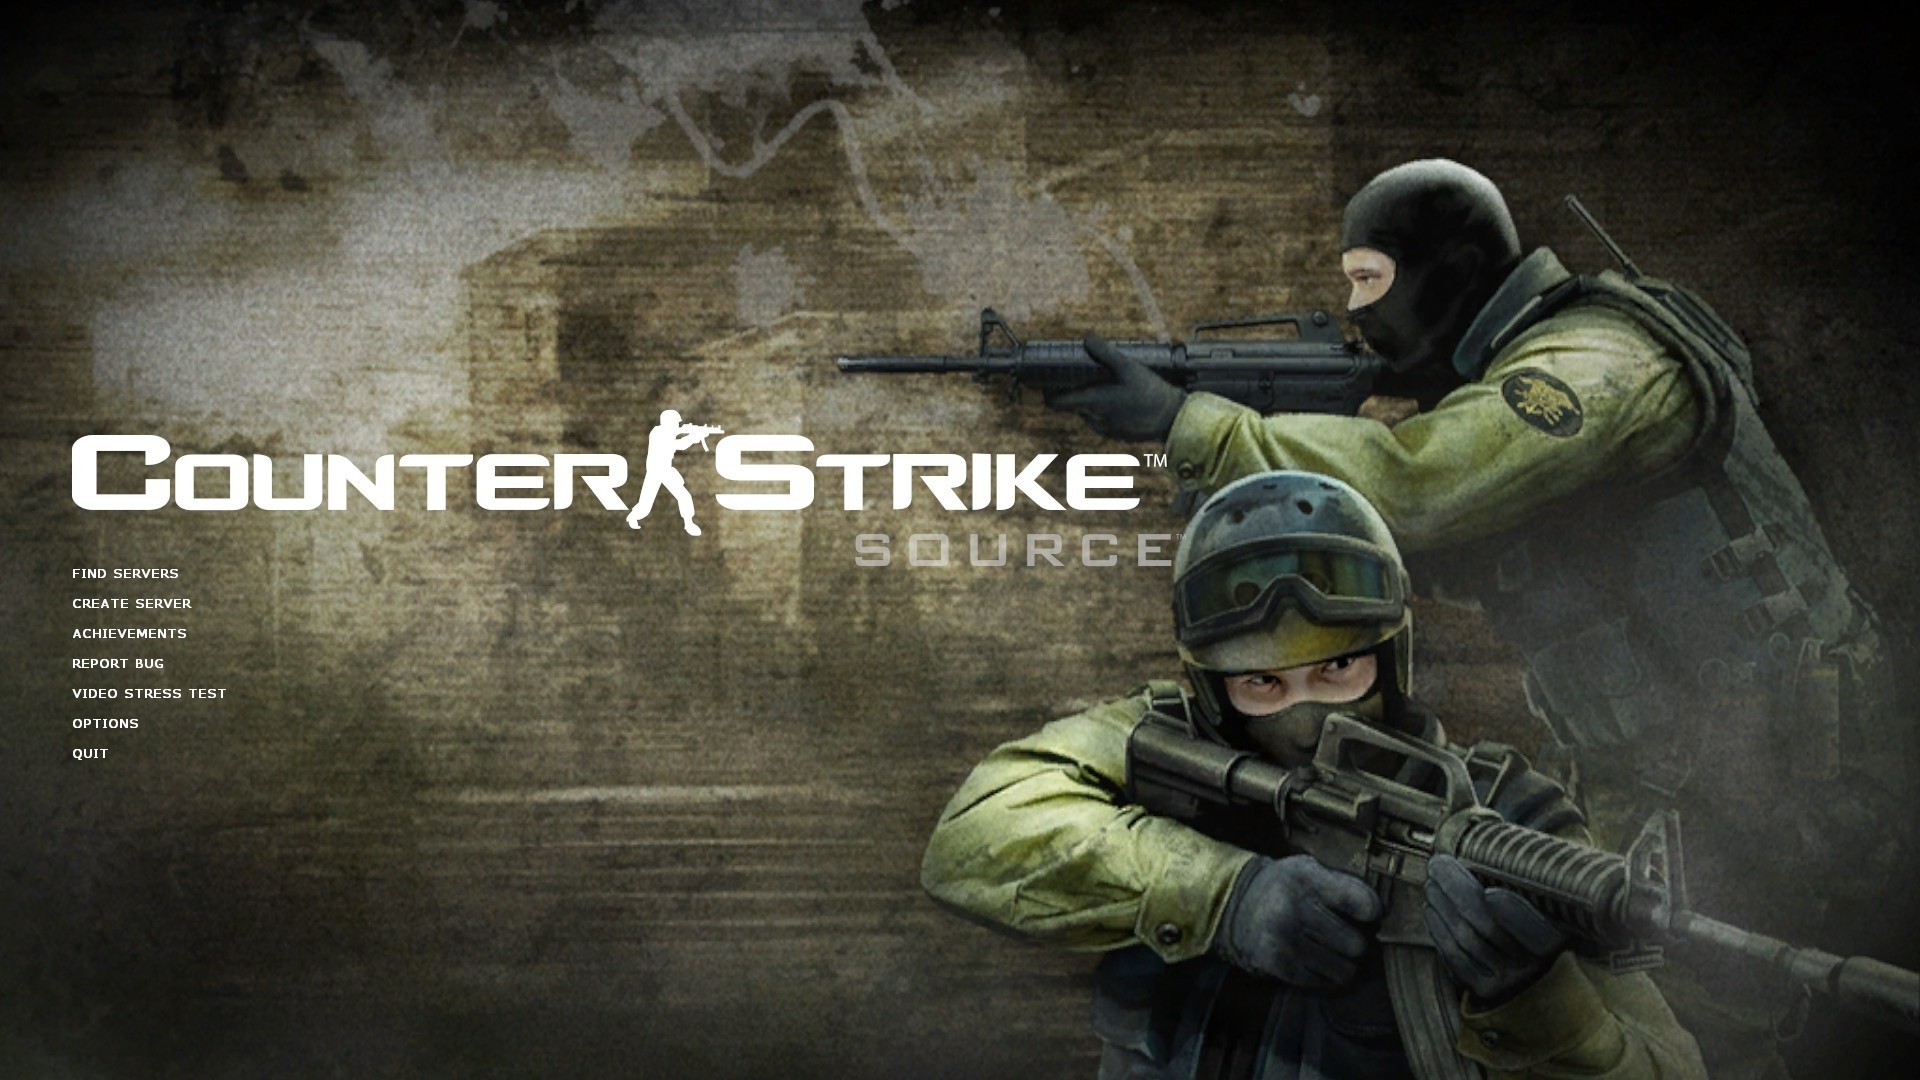 Counter strike for android 2.3 free download pc